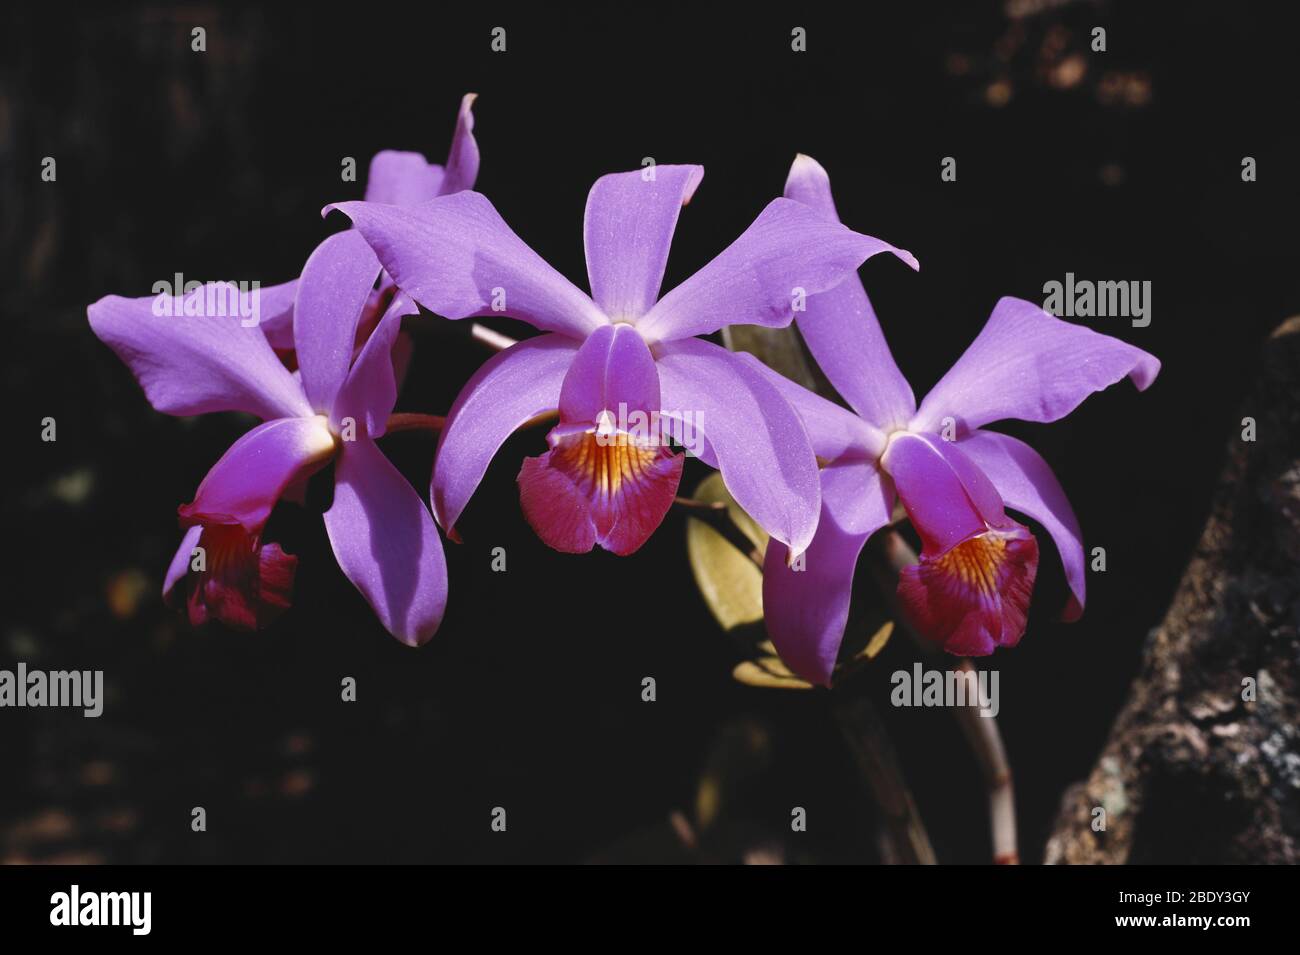 Cattleya Orchid Flowers Stock Photo